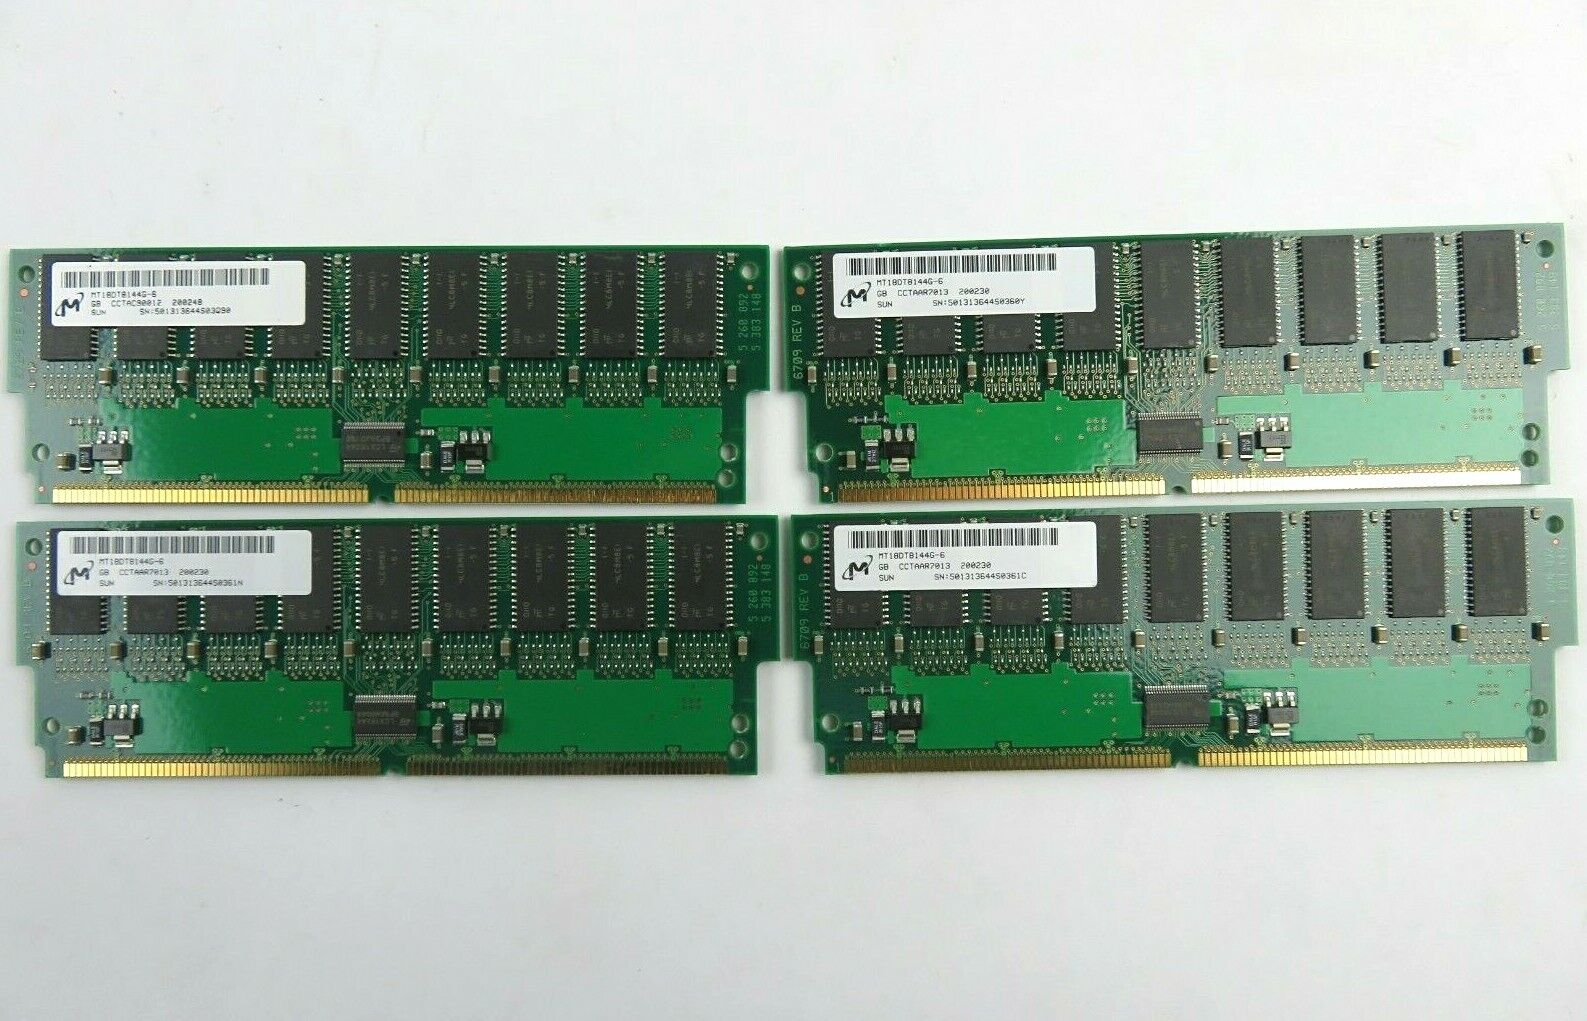 Micron MT18DT8144G-6 128MB Memory for Sun Server (Lot of 4)